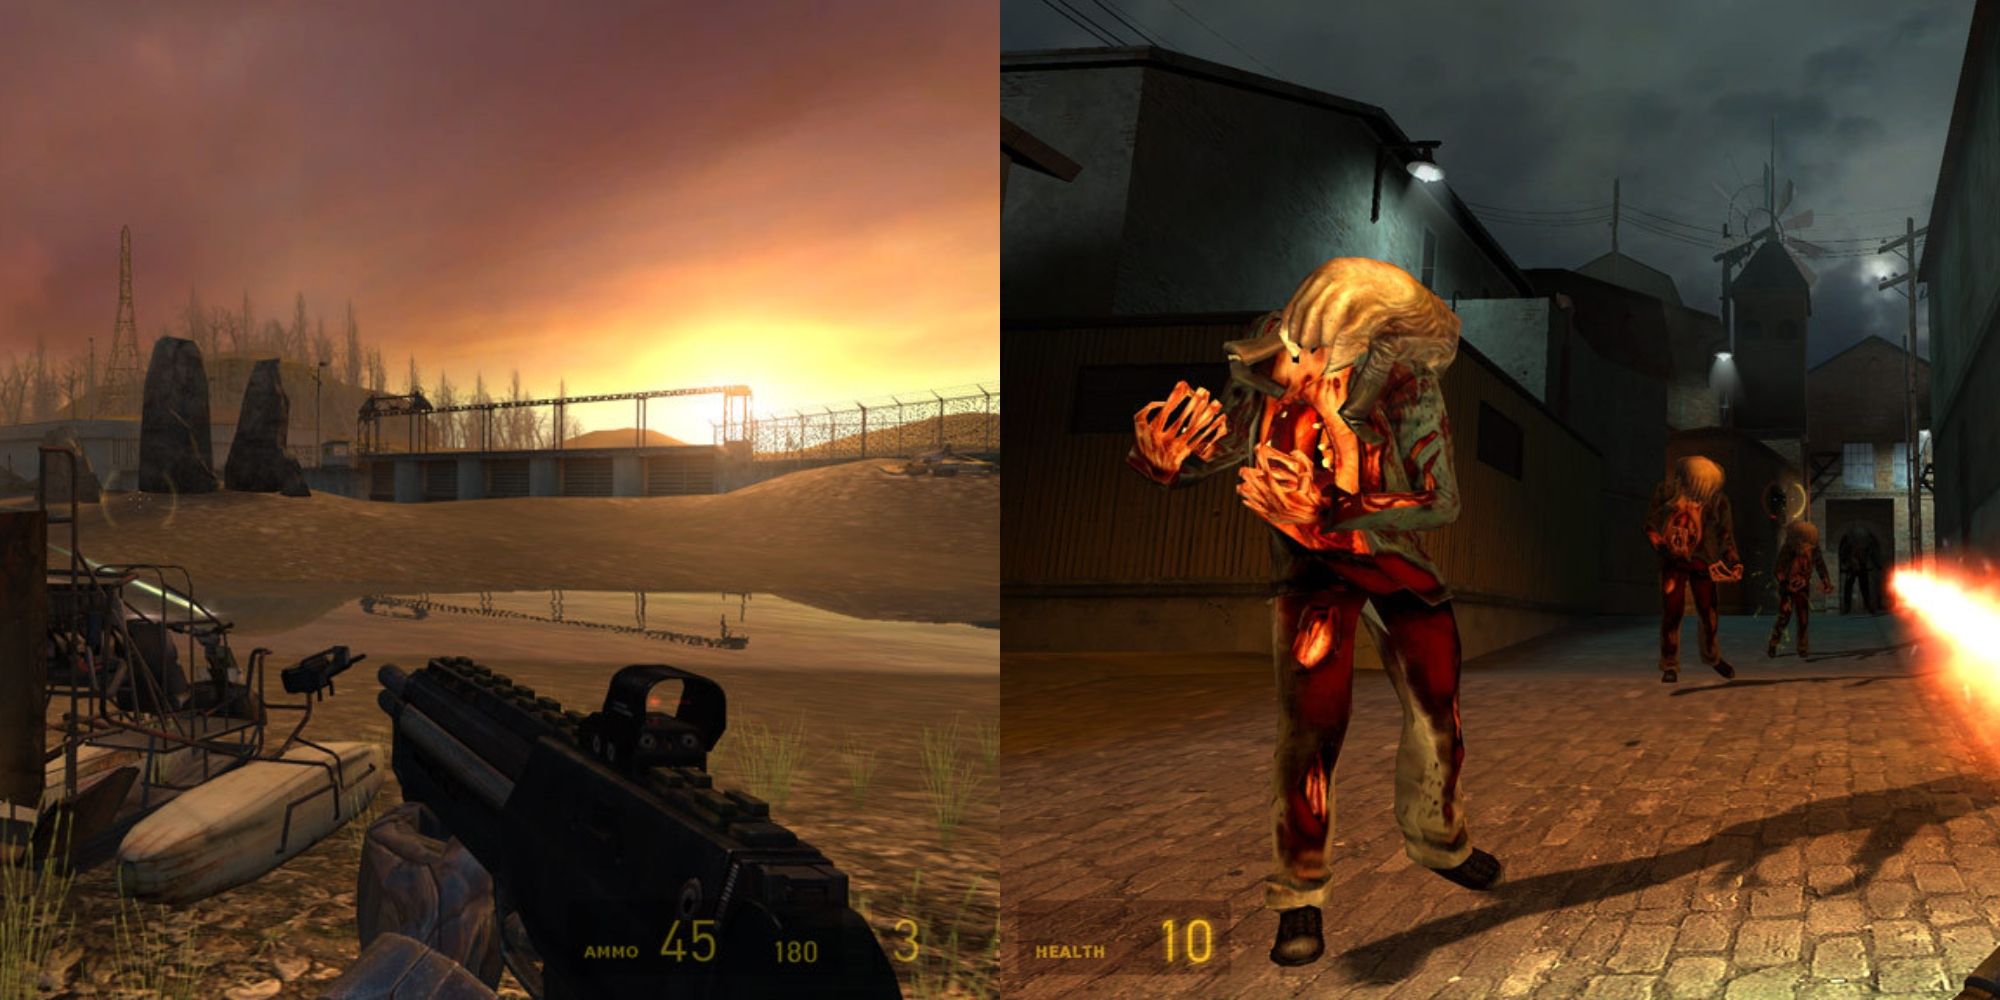 Half-Life 2 looking out over a sunset beside enemies shambling towards the player